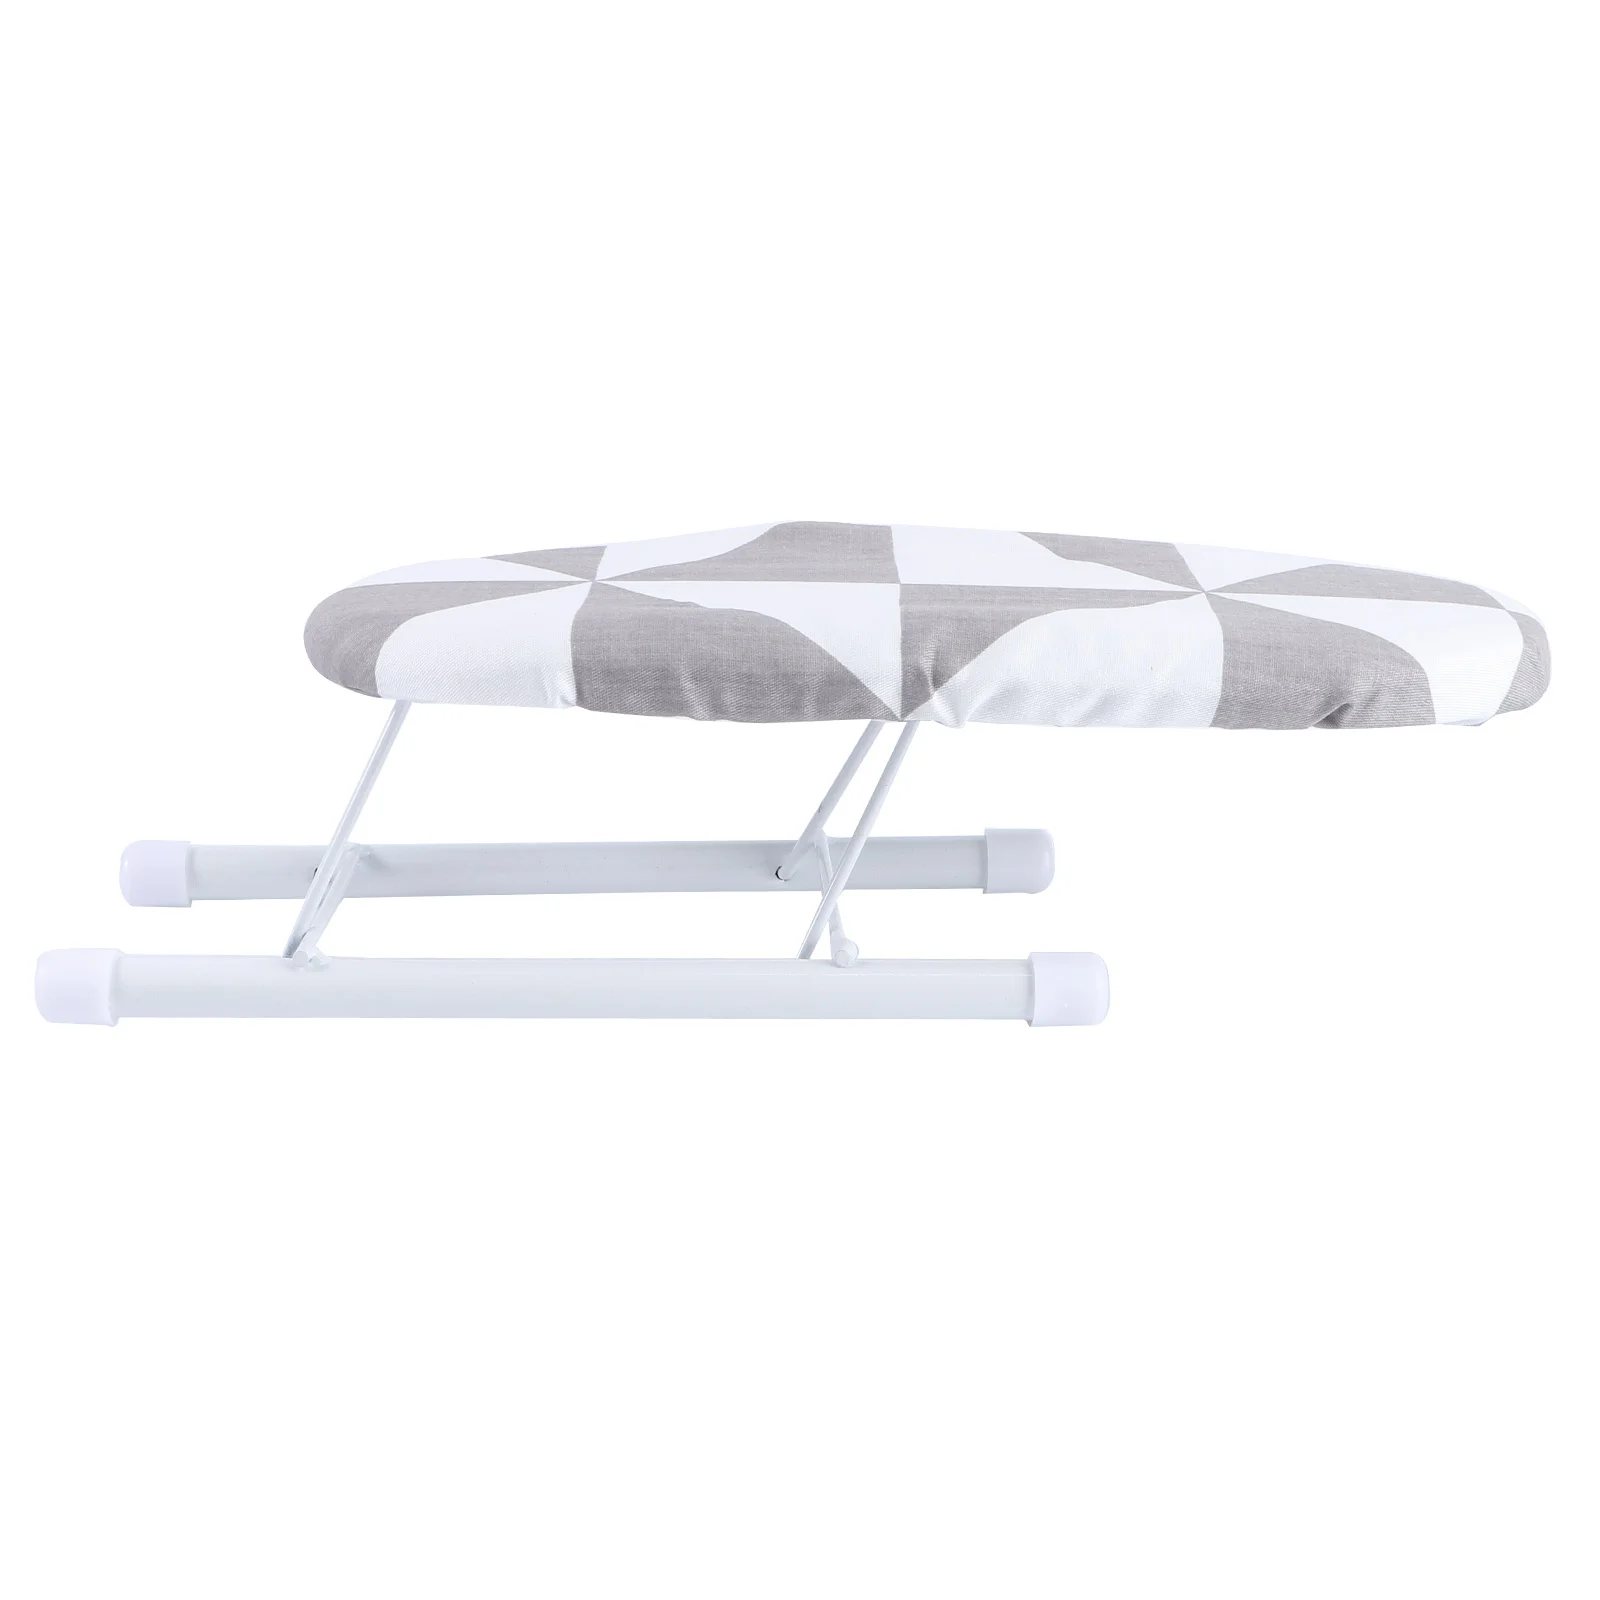 

Ironing Board Mini Sleeve Boards Rack Small Tabletop Space Saving Gifts Housewarming Cover Cotton Legs Racks Clothes Folding